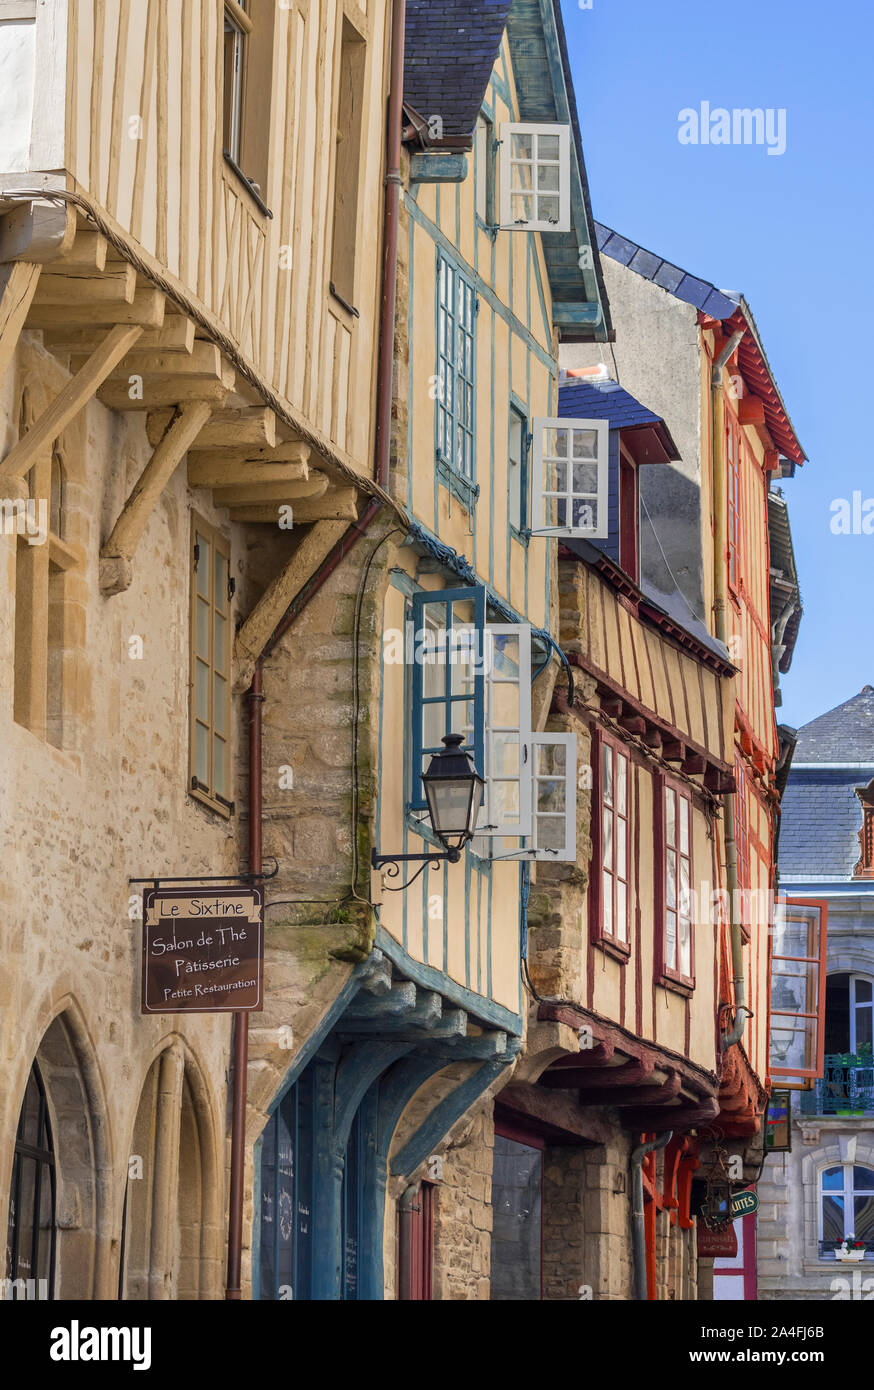 16th century timber framed house fronts in narrow street of the old town in the city Vannes, Morbihan, Brittany, France Stock Photo